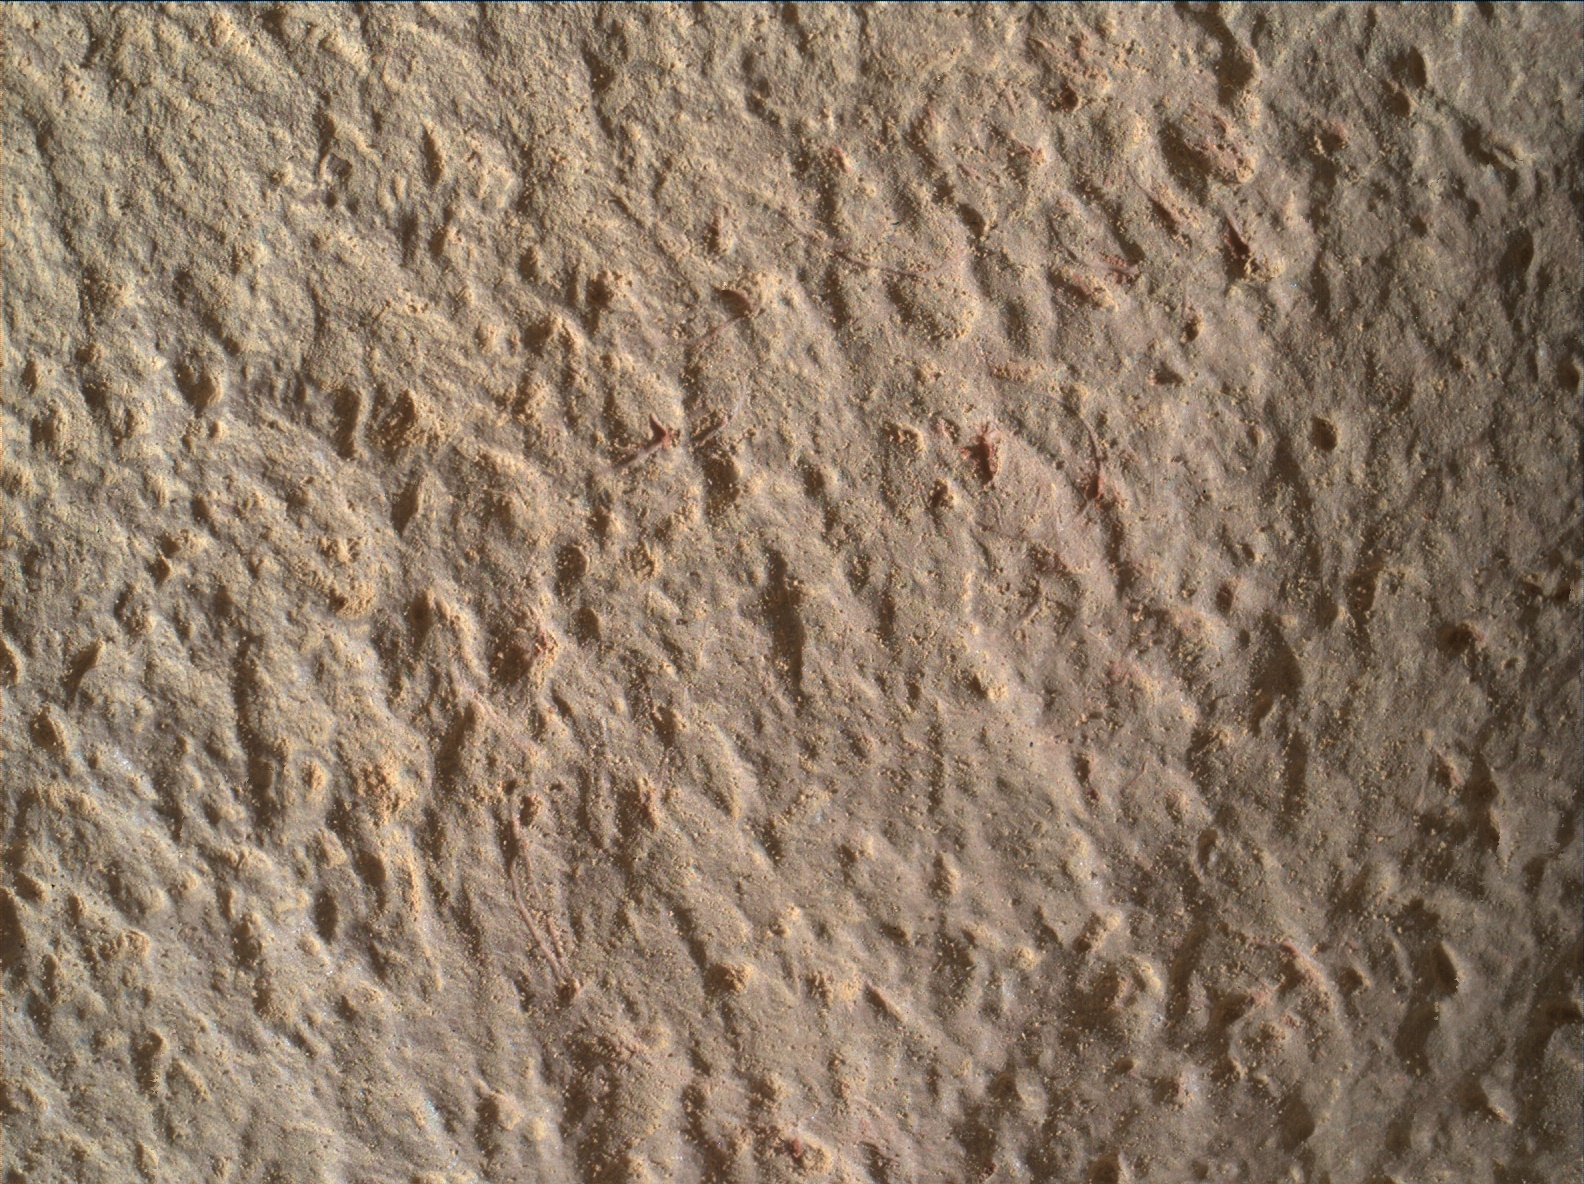 Nasa's Mars rover Curiosity acquired this image using its Mars Hand Lens Imager (MAHLI) on Sol 1380